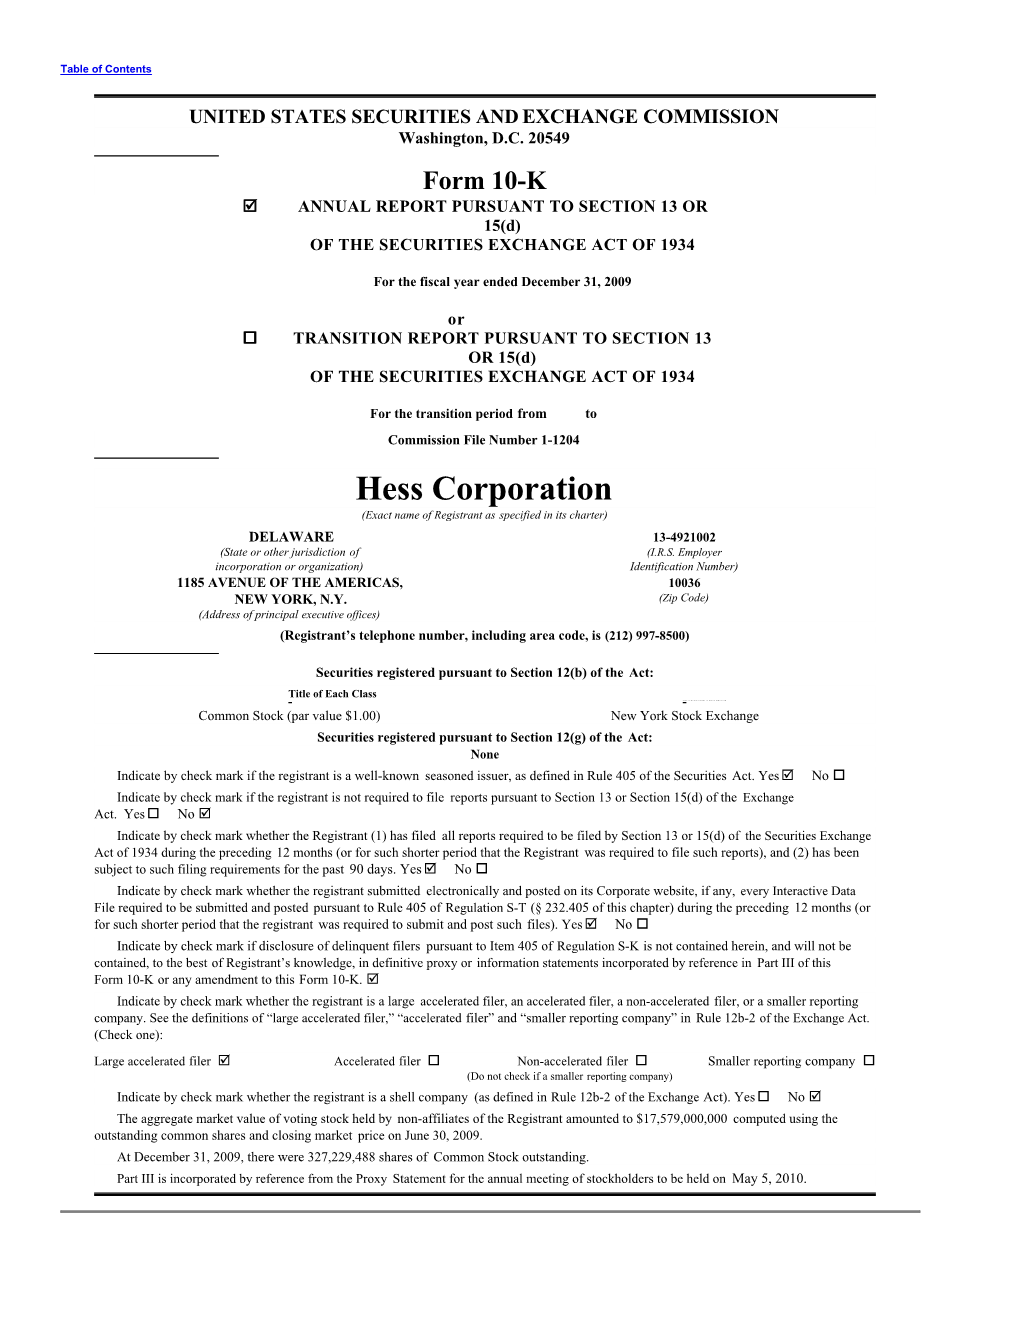 Form 10-K  ANNUAL REPORT PURSUANT to SECTION 13 OR 15(D) of the SECURITIES EXCHANGE ACT of 1934